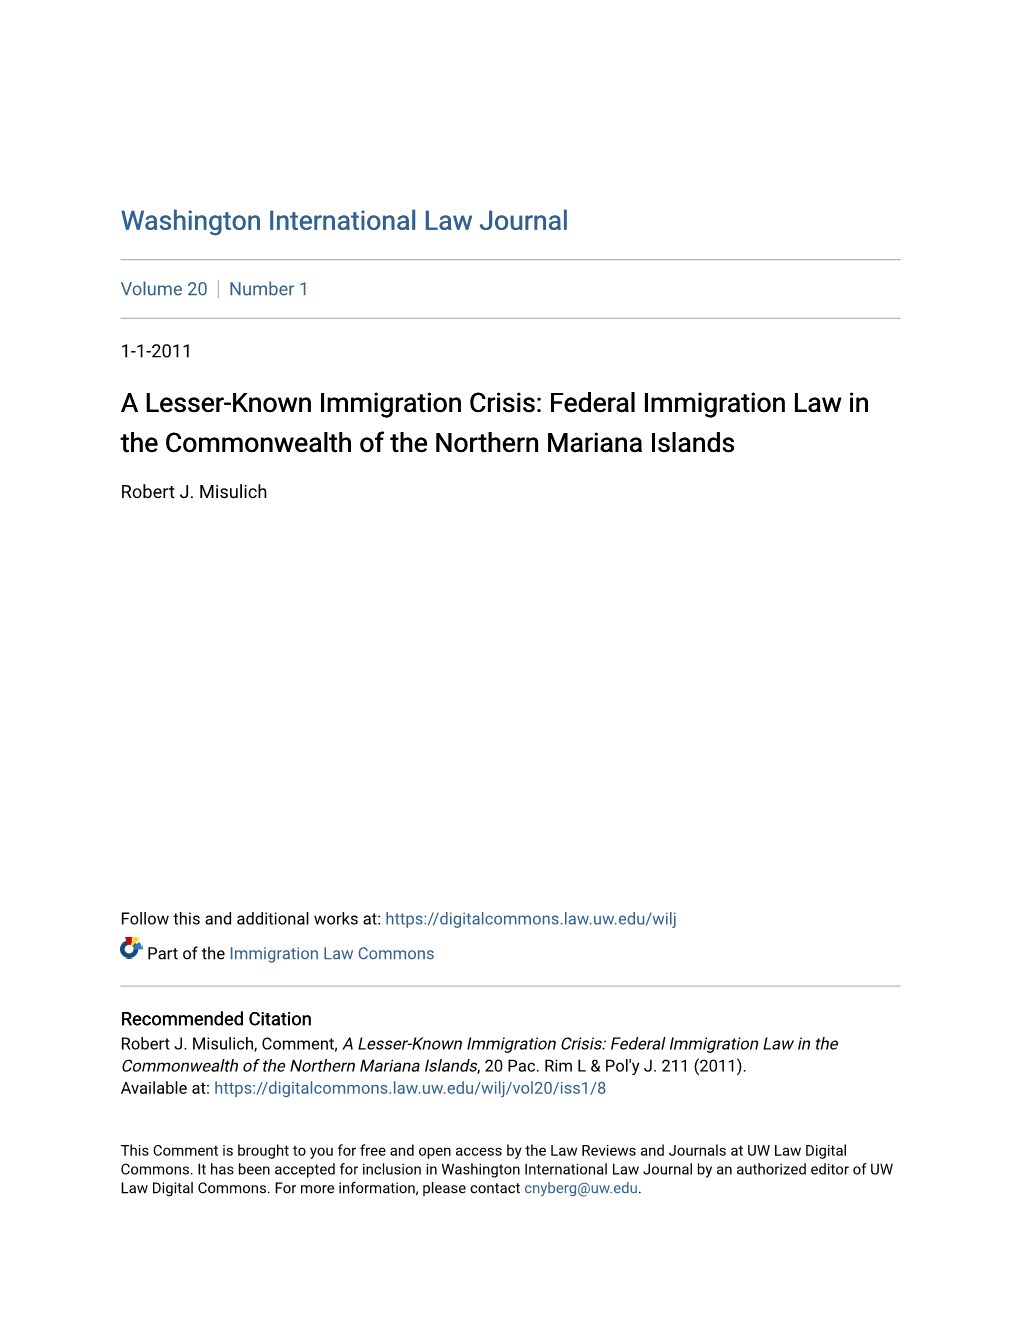 Federal Immigration Law in the Commonwealth of the Northern Mariana Islands